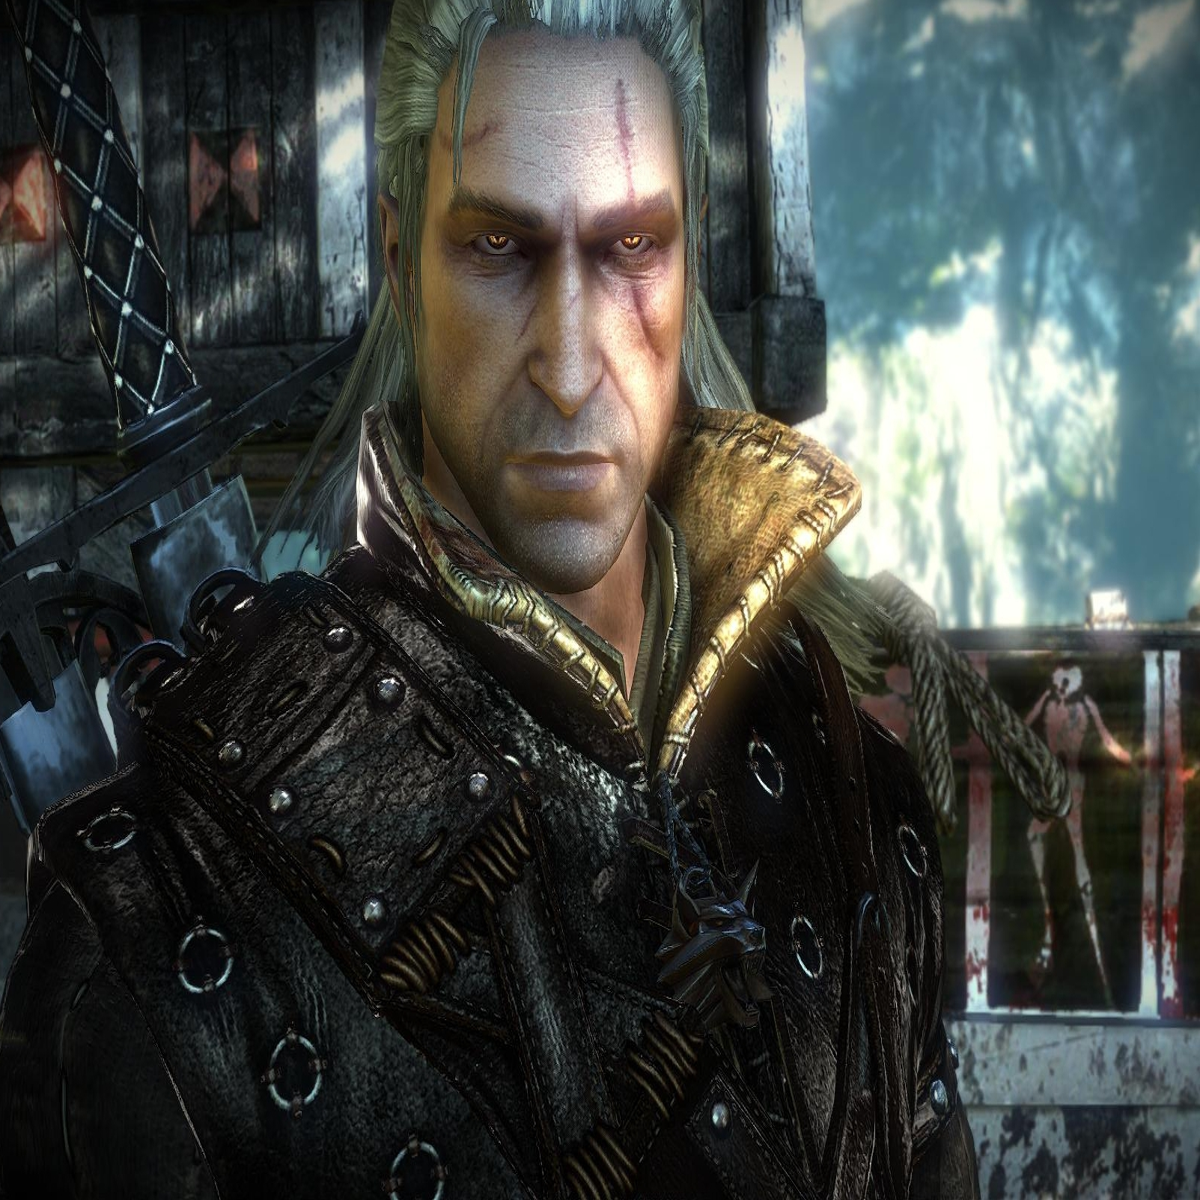 The Witcher 2: Assassins of Kings para Xbox One - Download